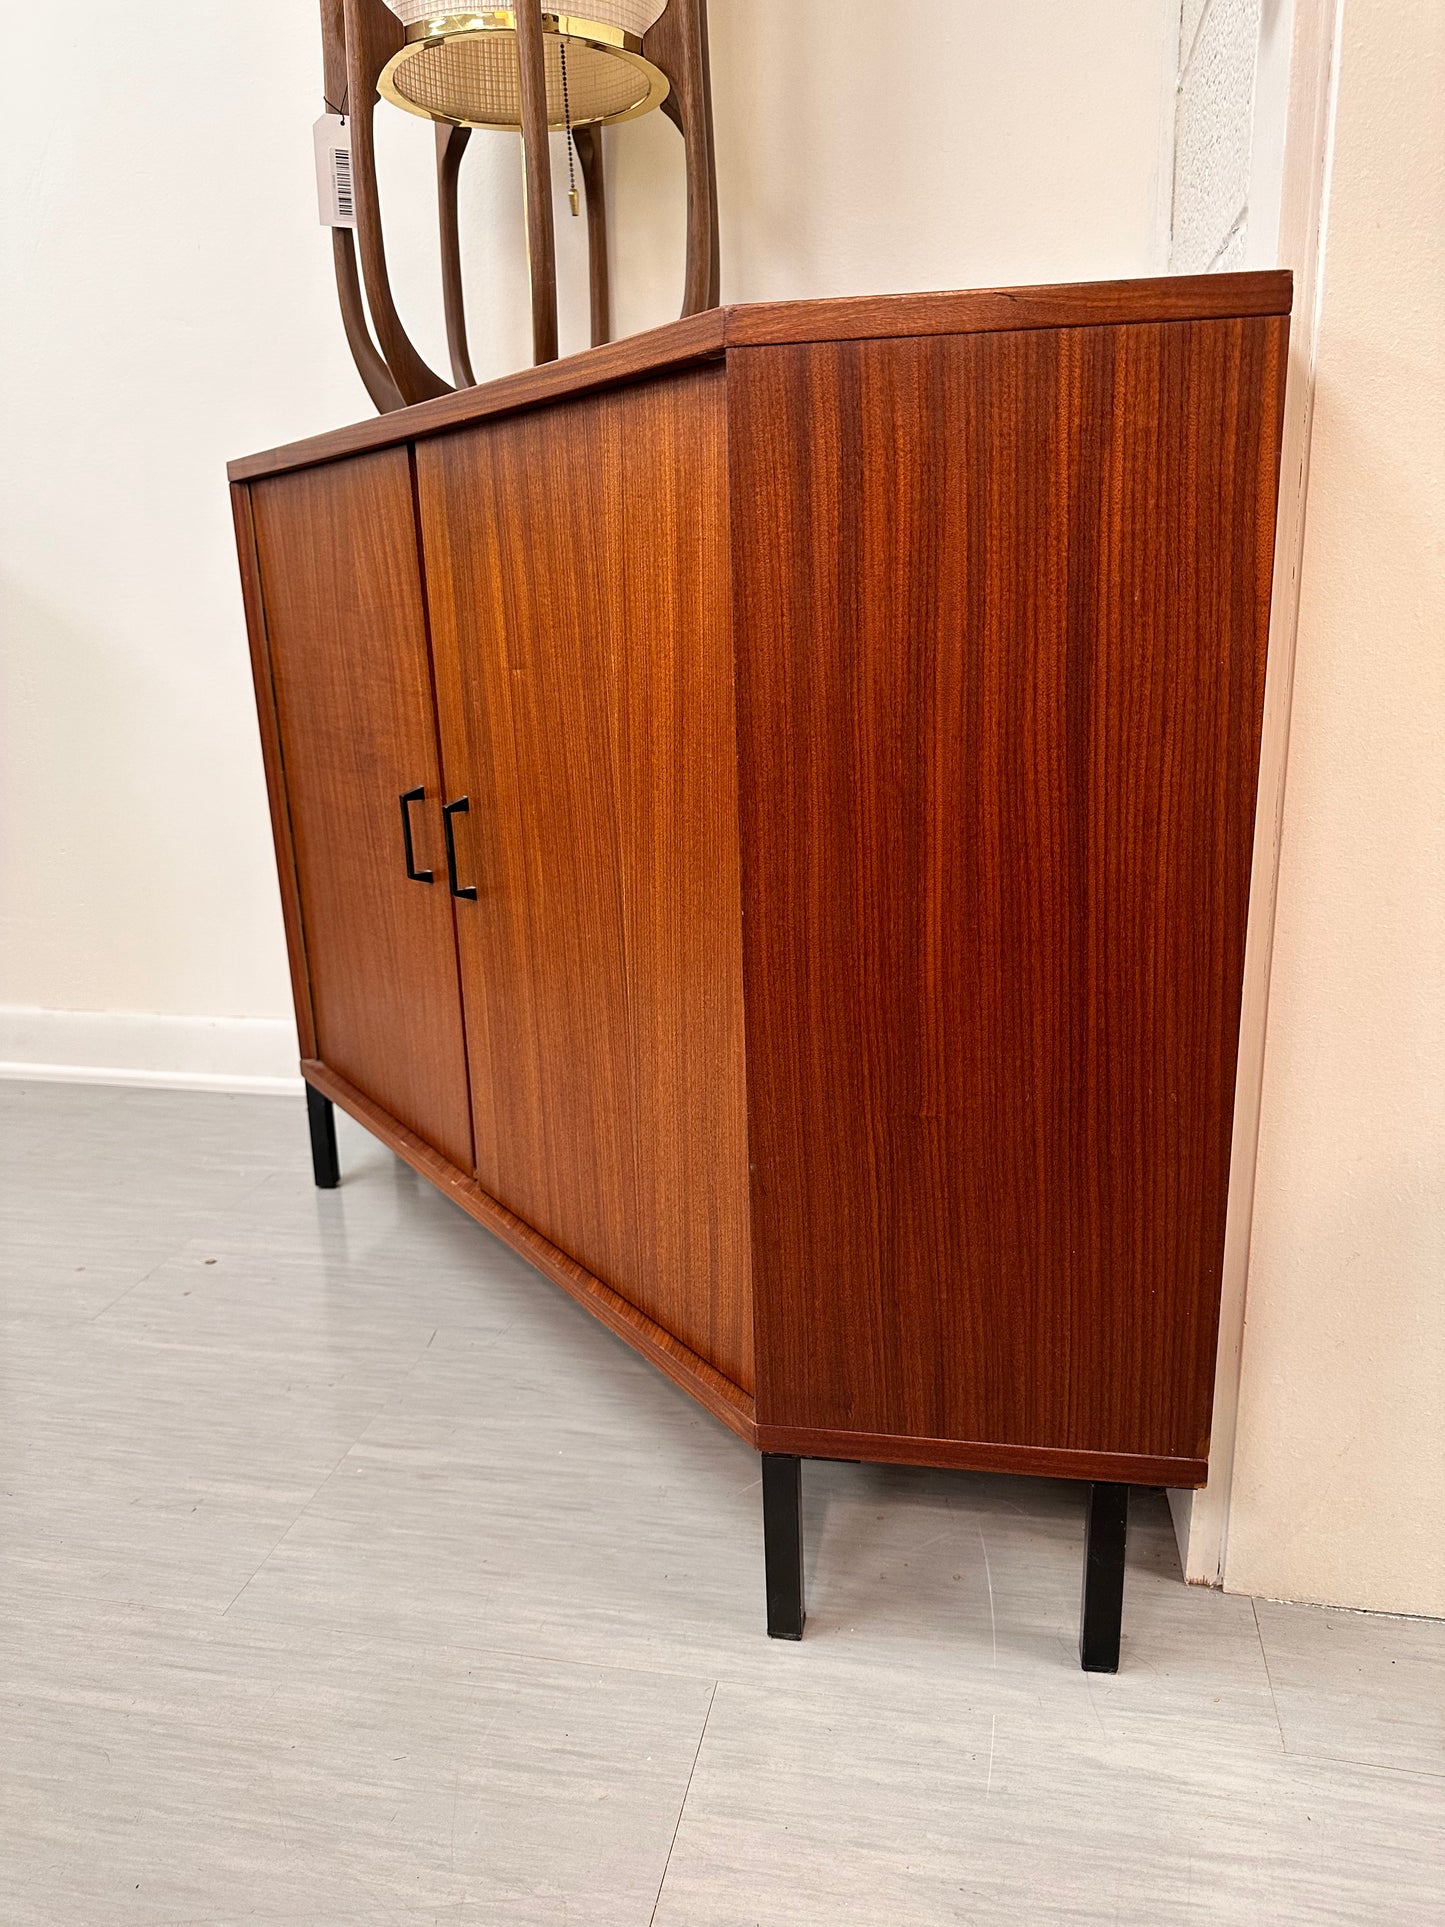 MCM AFROMOSIA CORNER RECORD CABINET/TV STAND